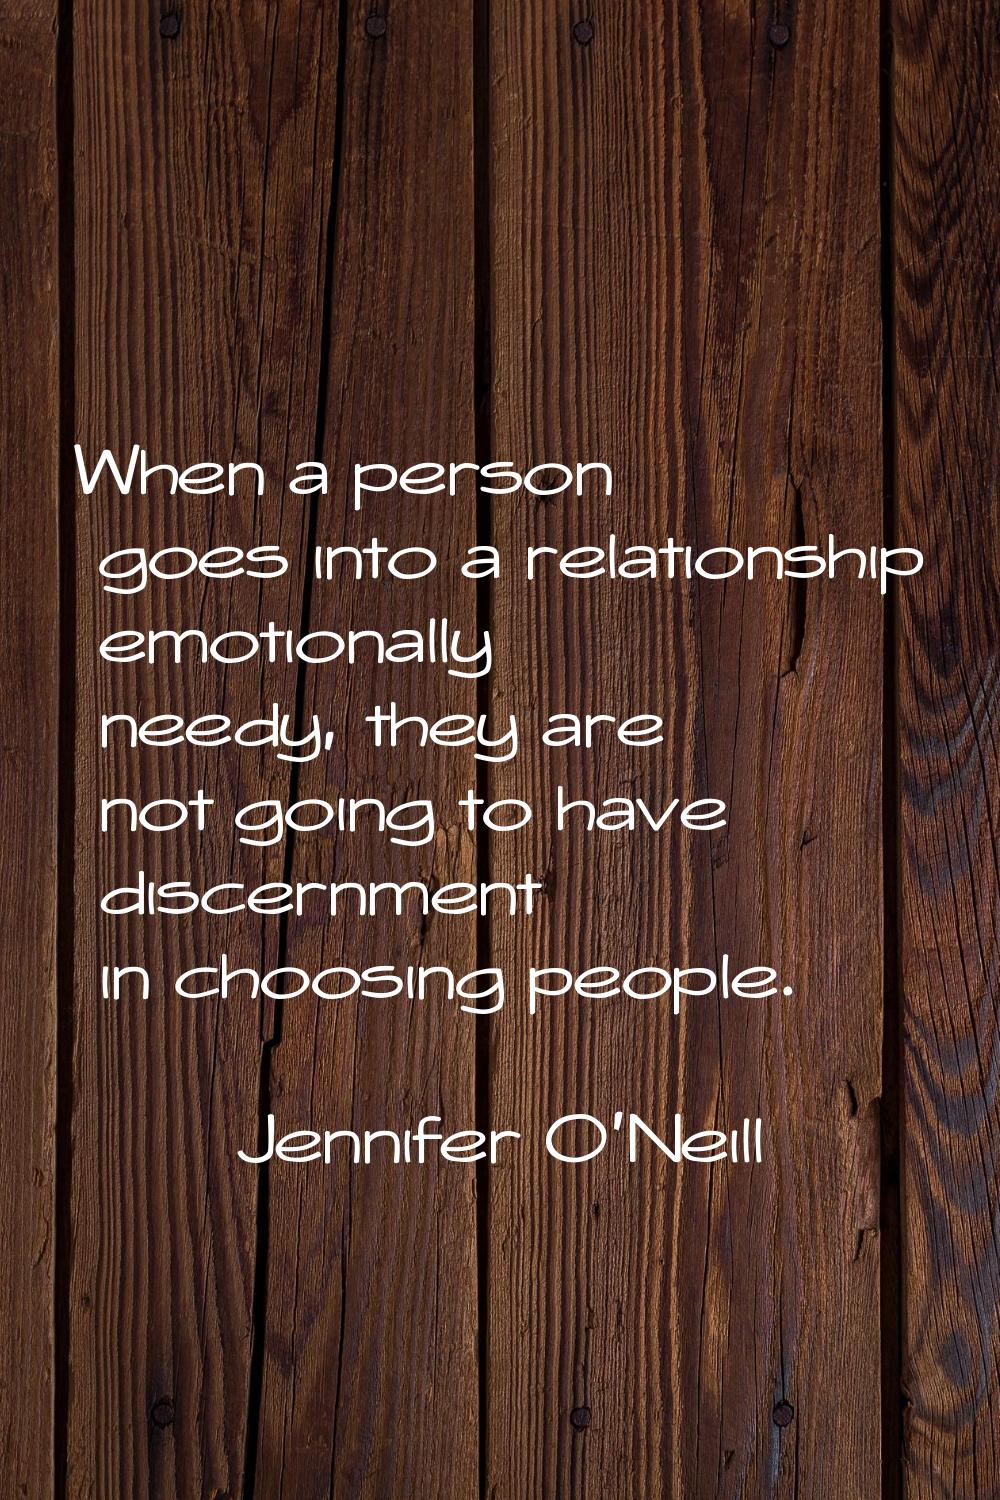 When a person goes into a relationship emotionally needy, they are not going to have discernment in